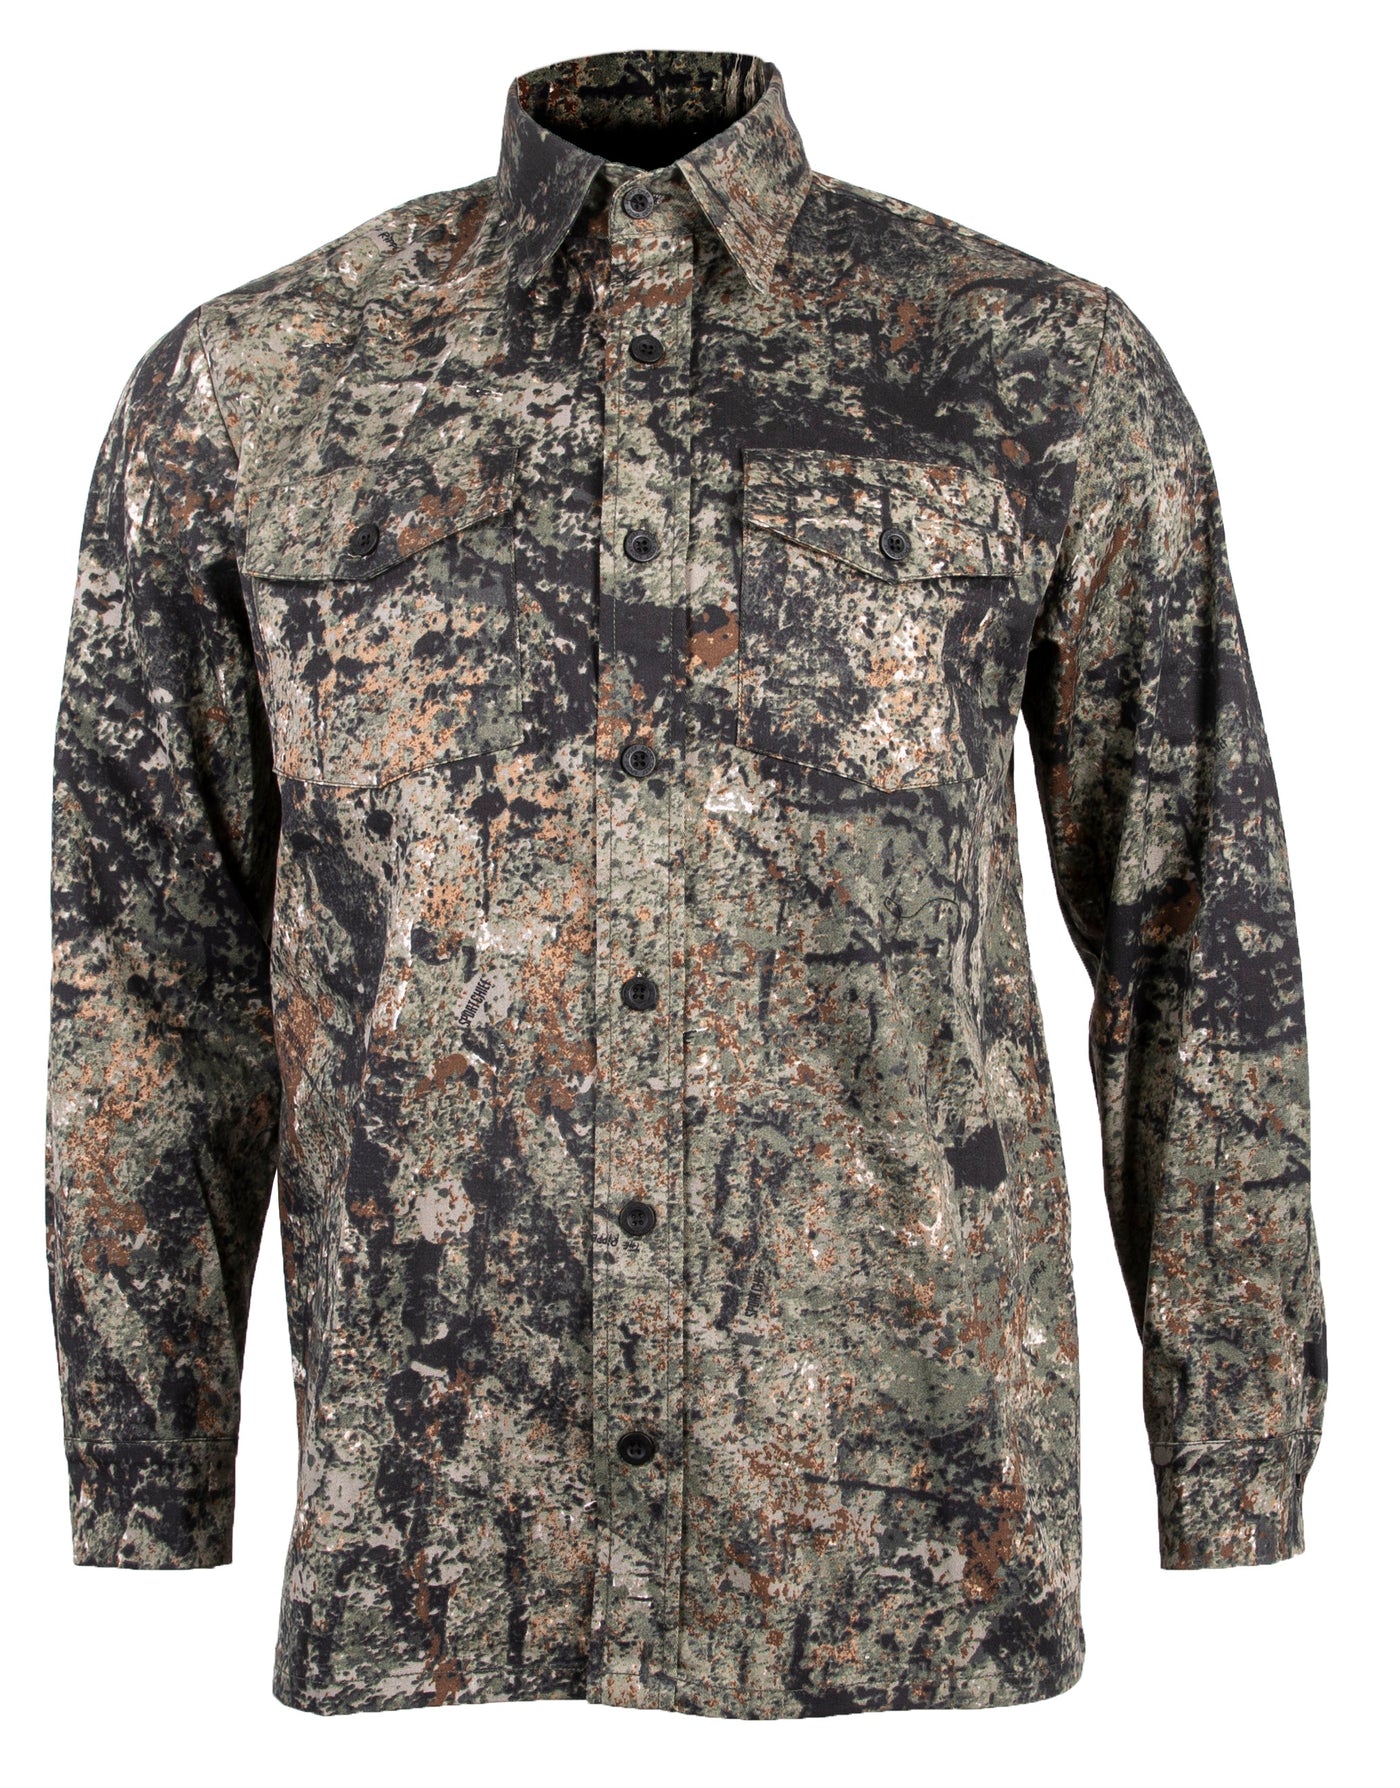 Chemise de chasse "Goliath" homme camo "The Ripper"  - Sportchief